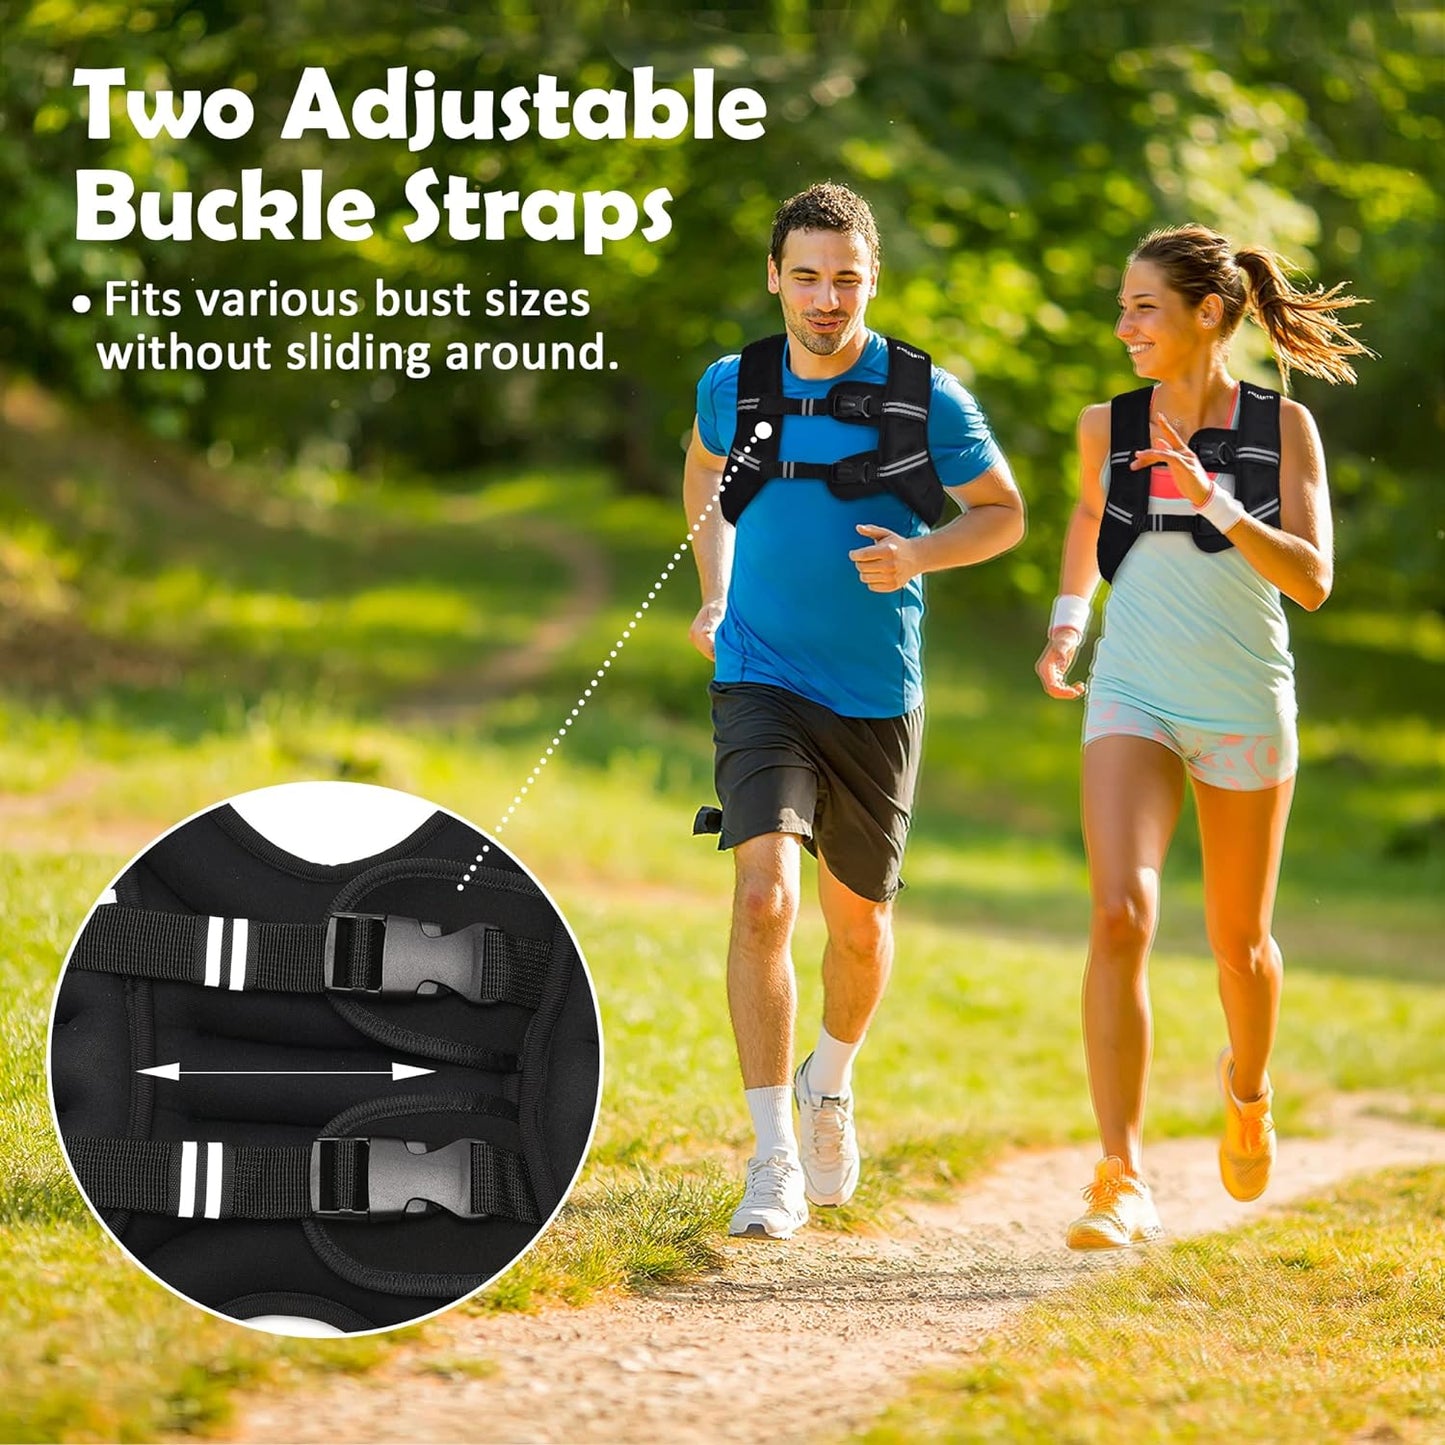 Unleash Your Potential: Weighted Vest with Ankle/Wrist Weights – Elevate Your Workout Journey